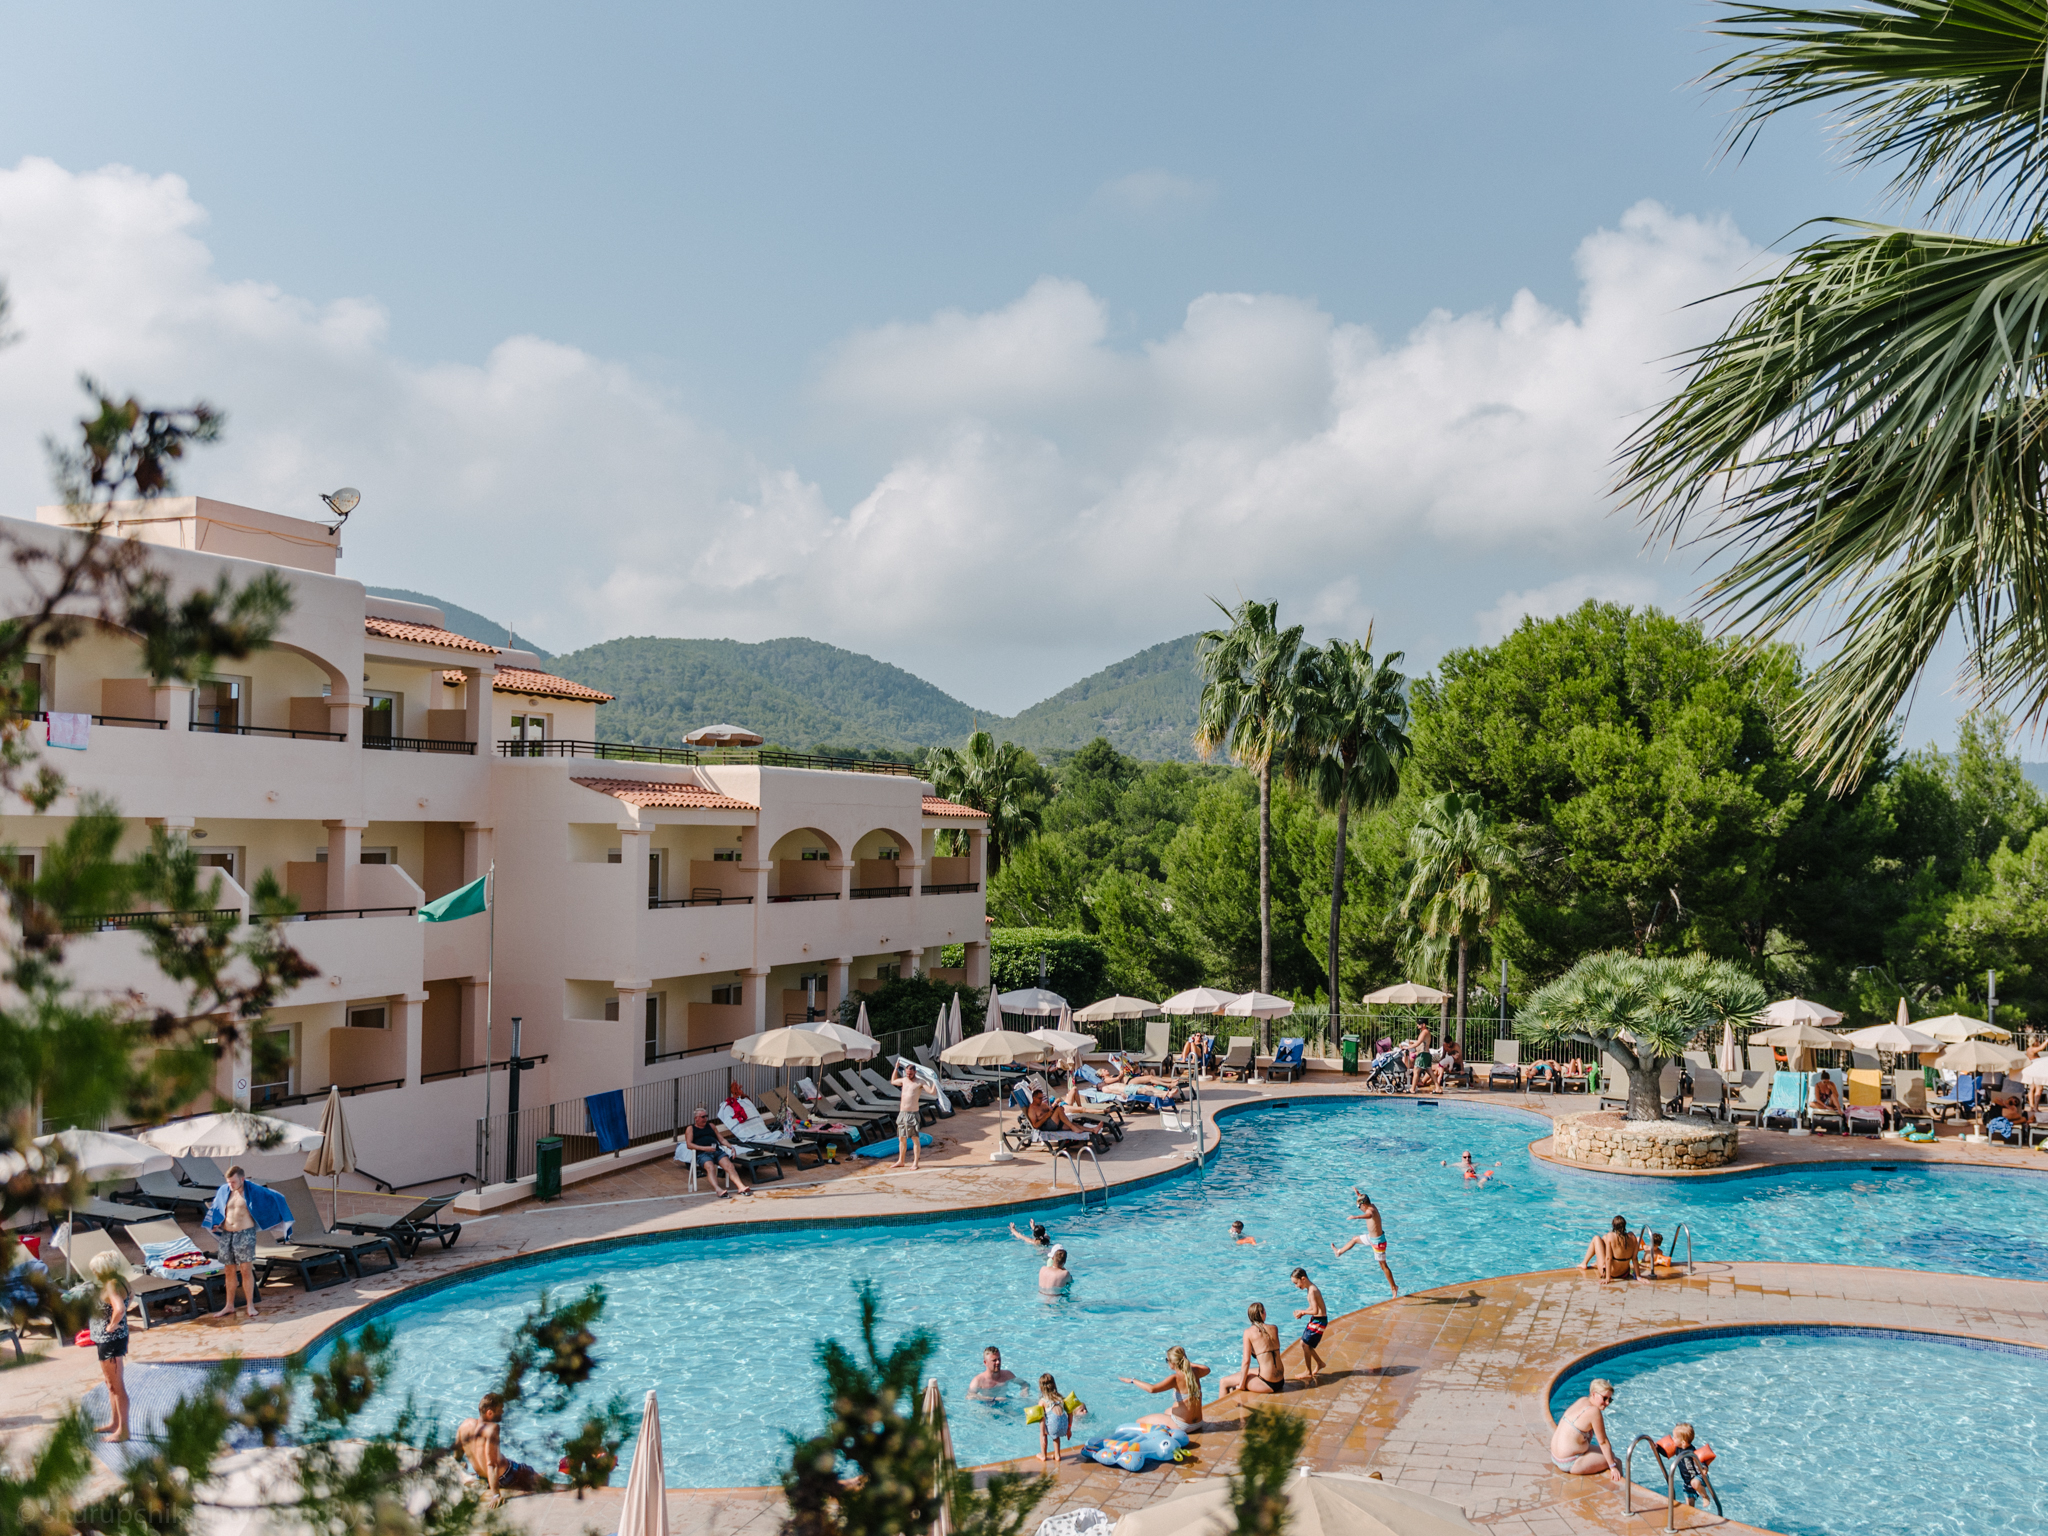 INVISA Hotel Cala Blanca, Ibiza - our review of the family resort